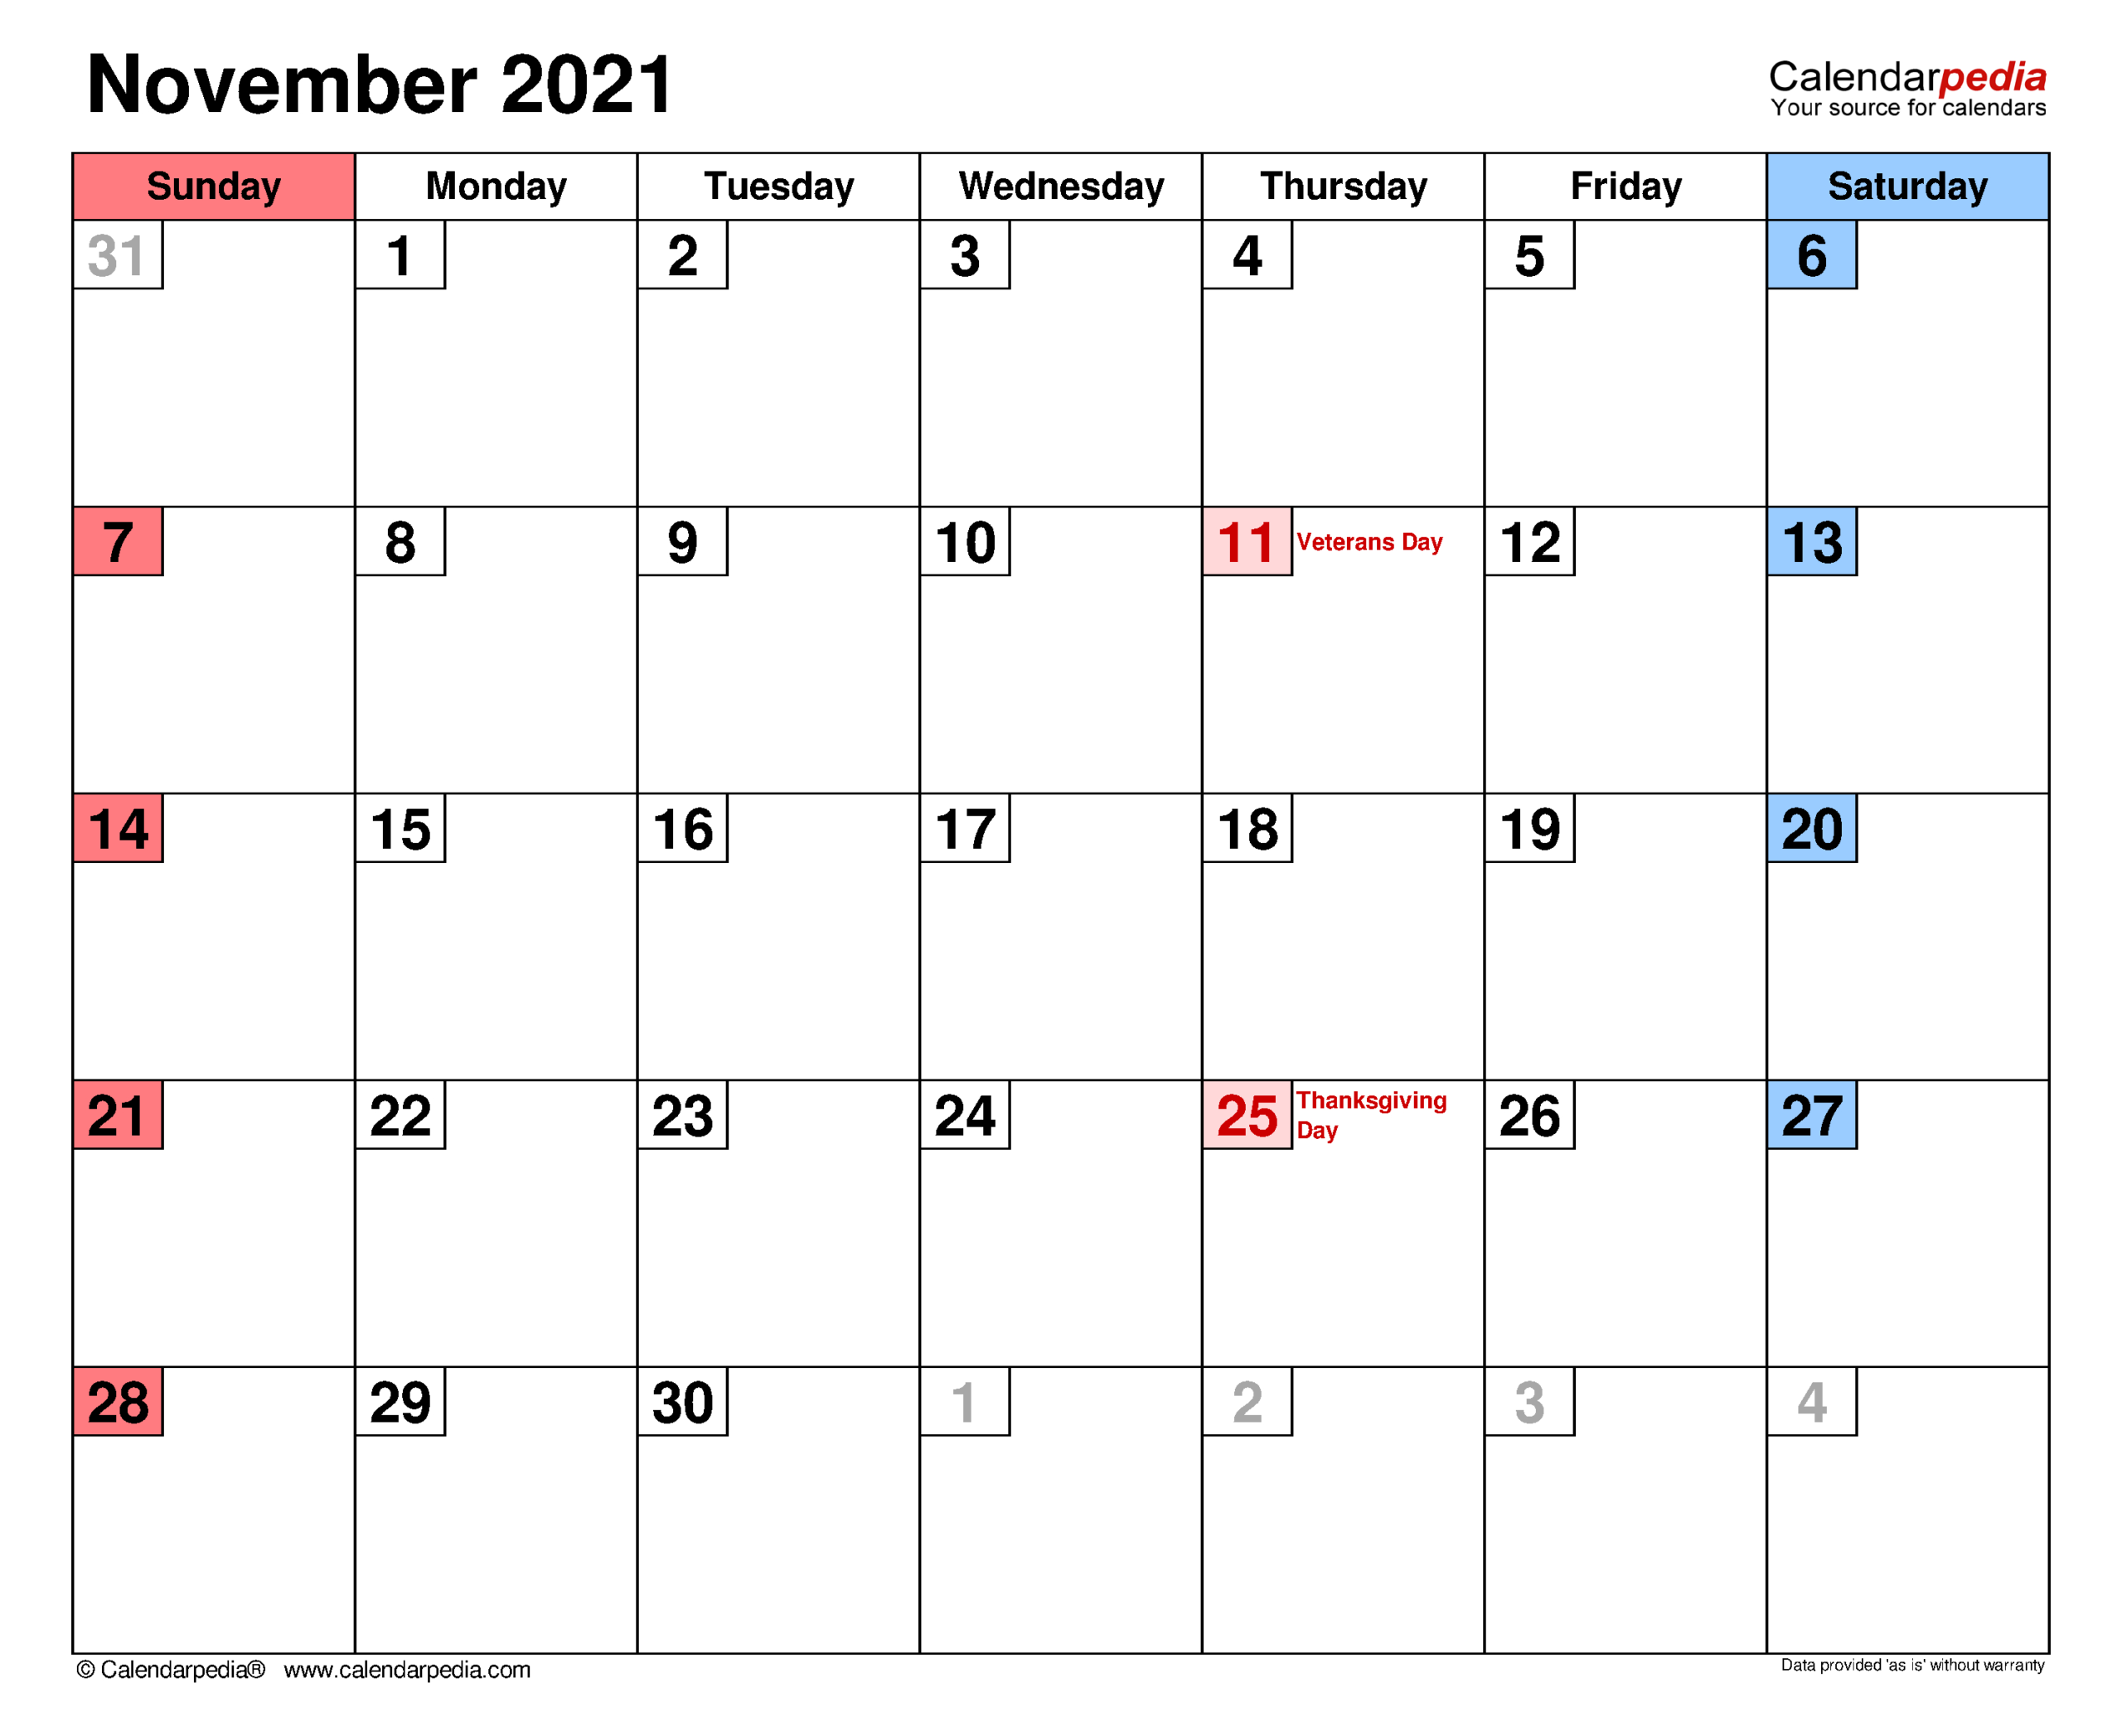 November 2021 Calendar | Templates For Word, Excel And Pdf